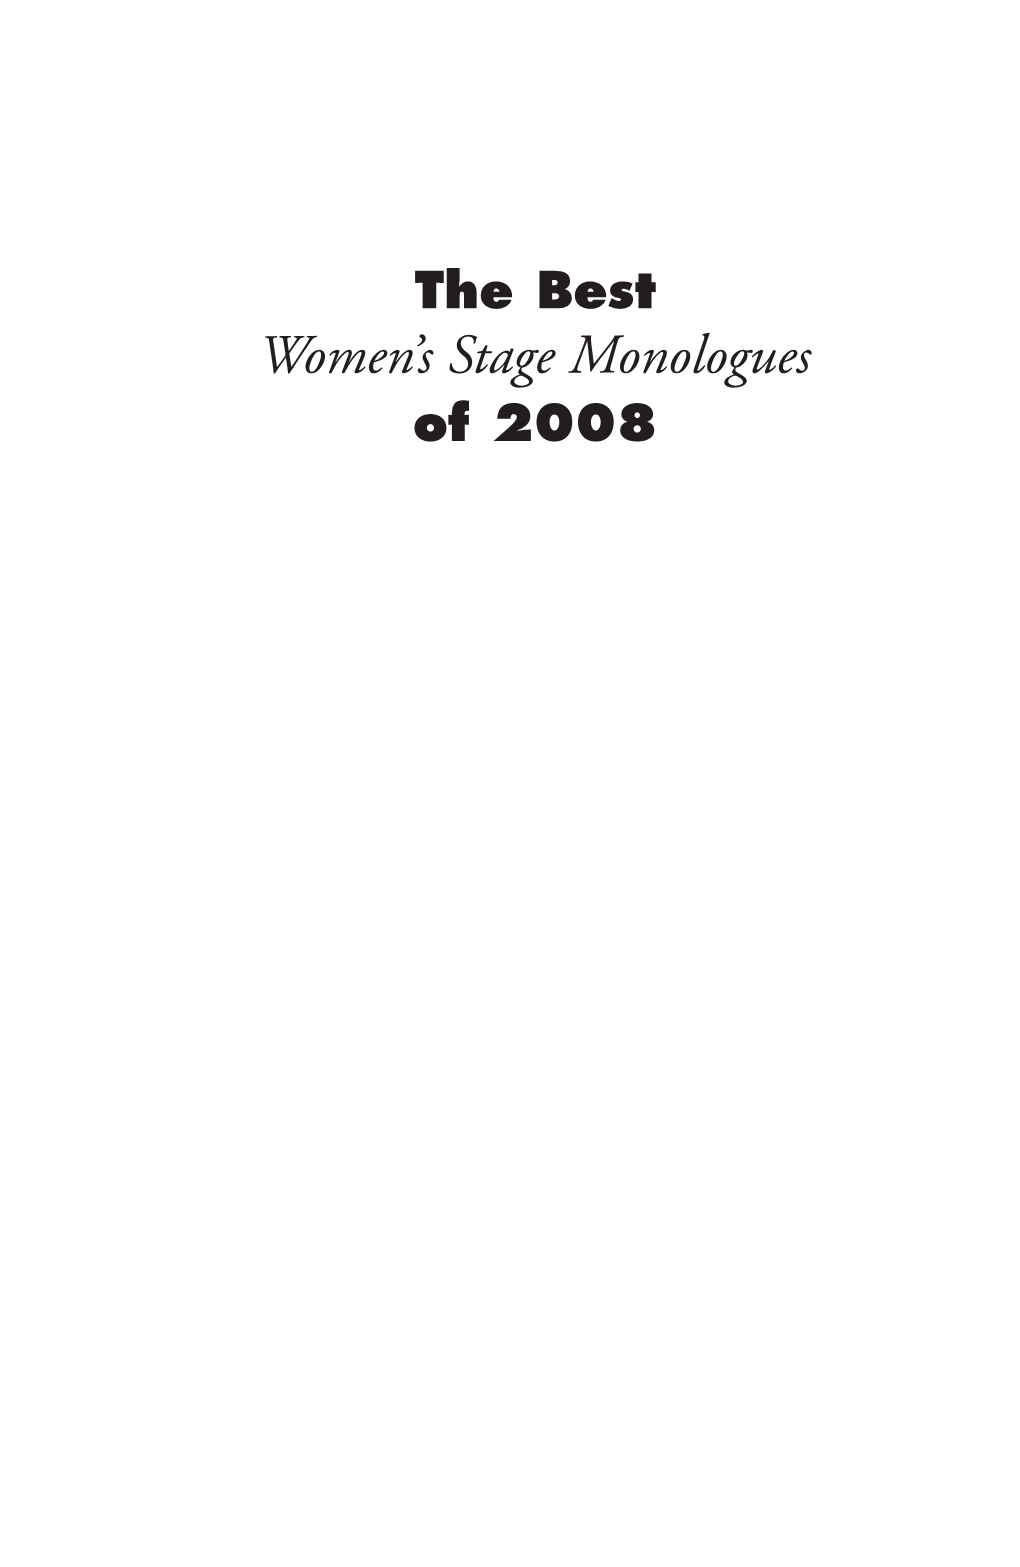 The Best Women’S Stage Monologues of 2008